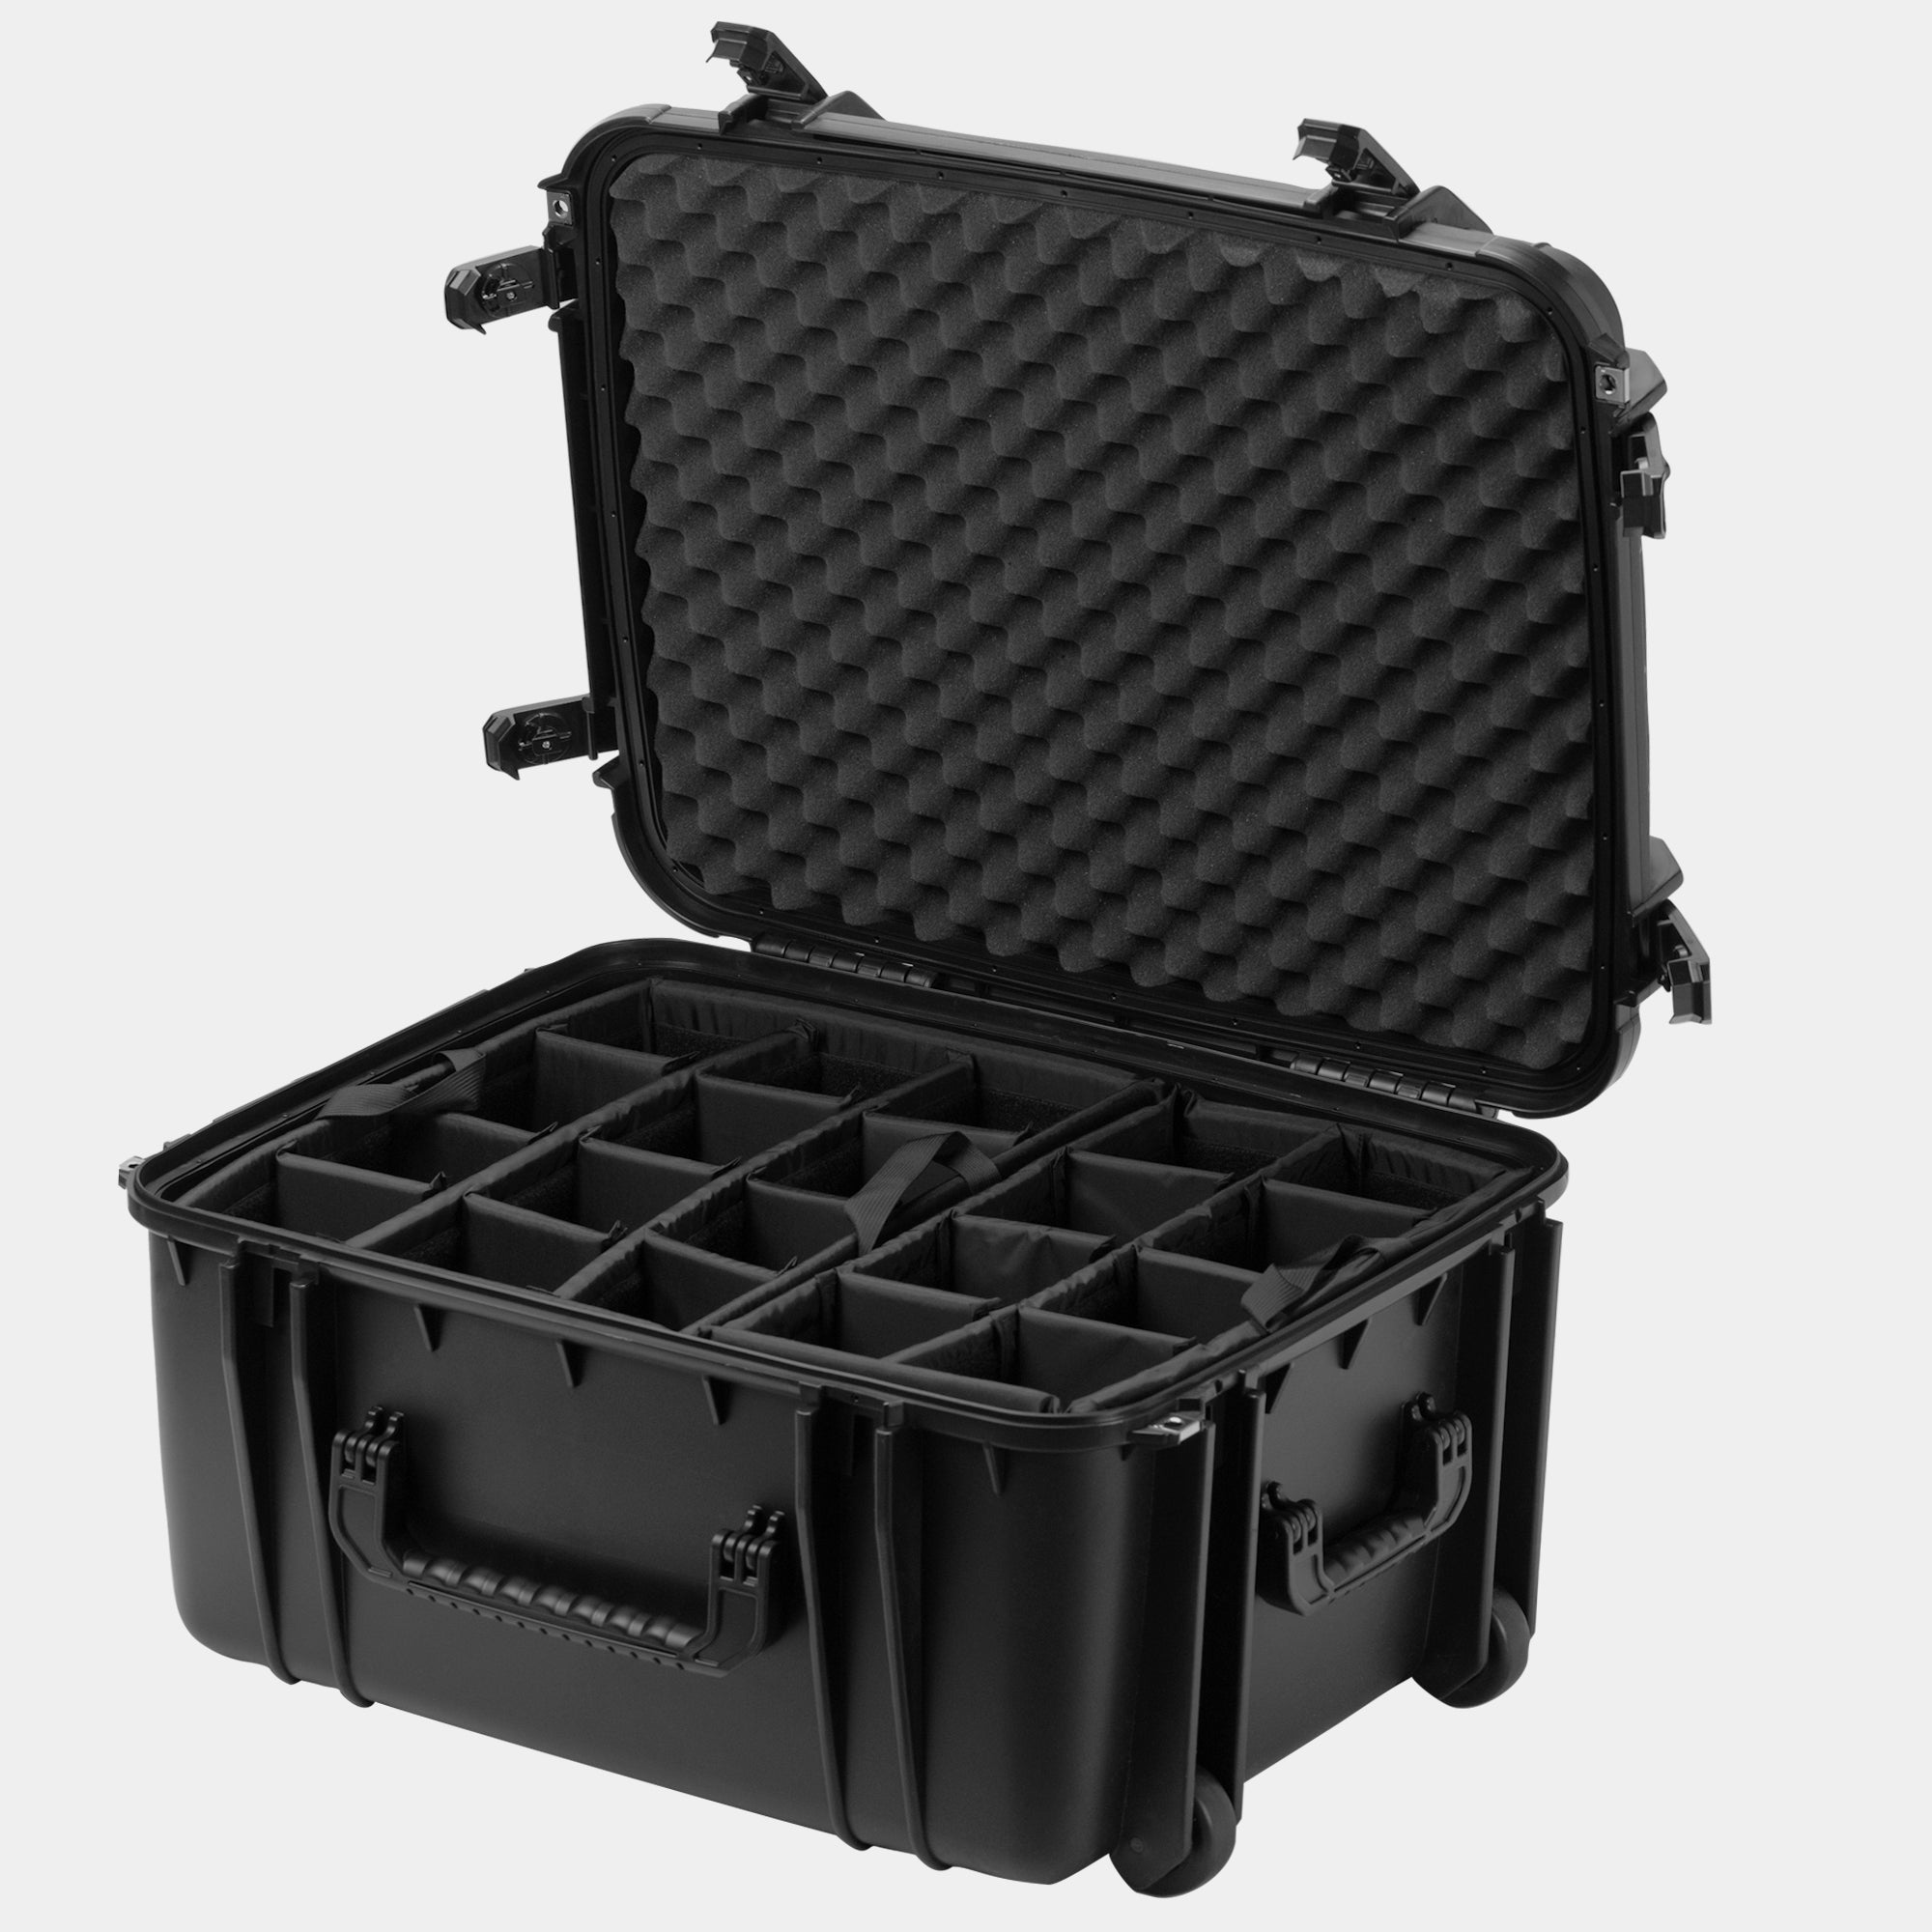 Seahorse 12 Series Official – Cases